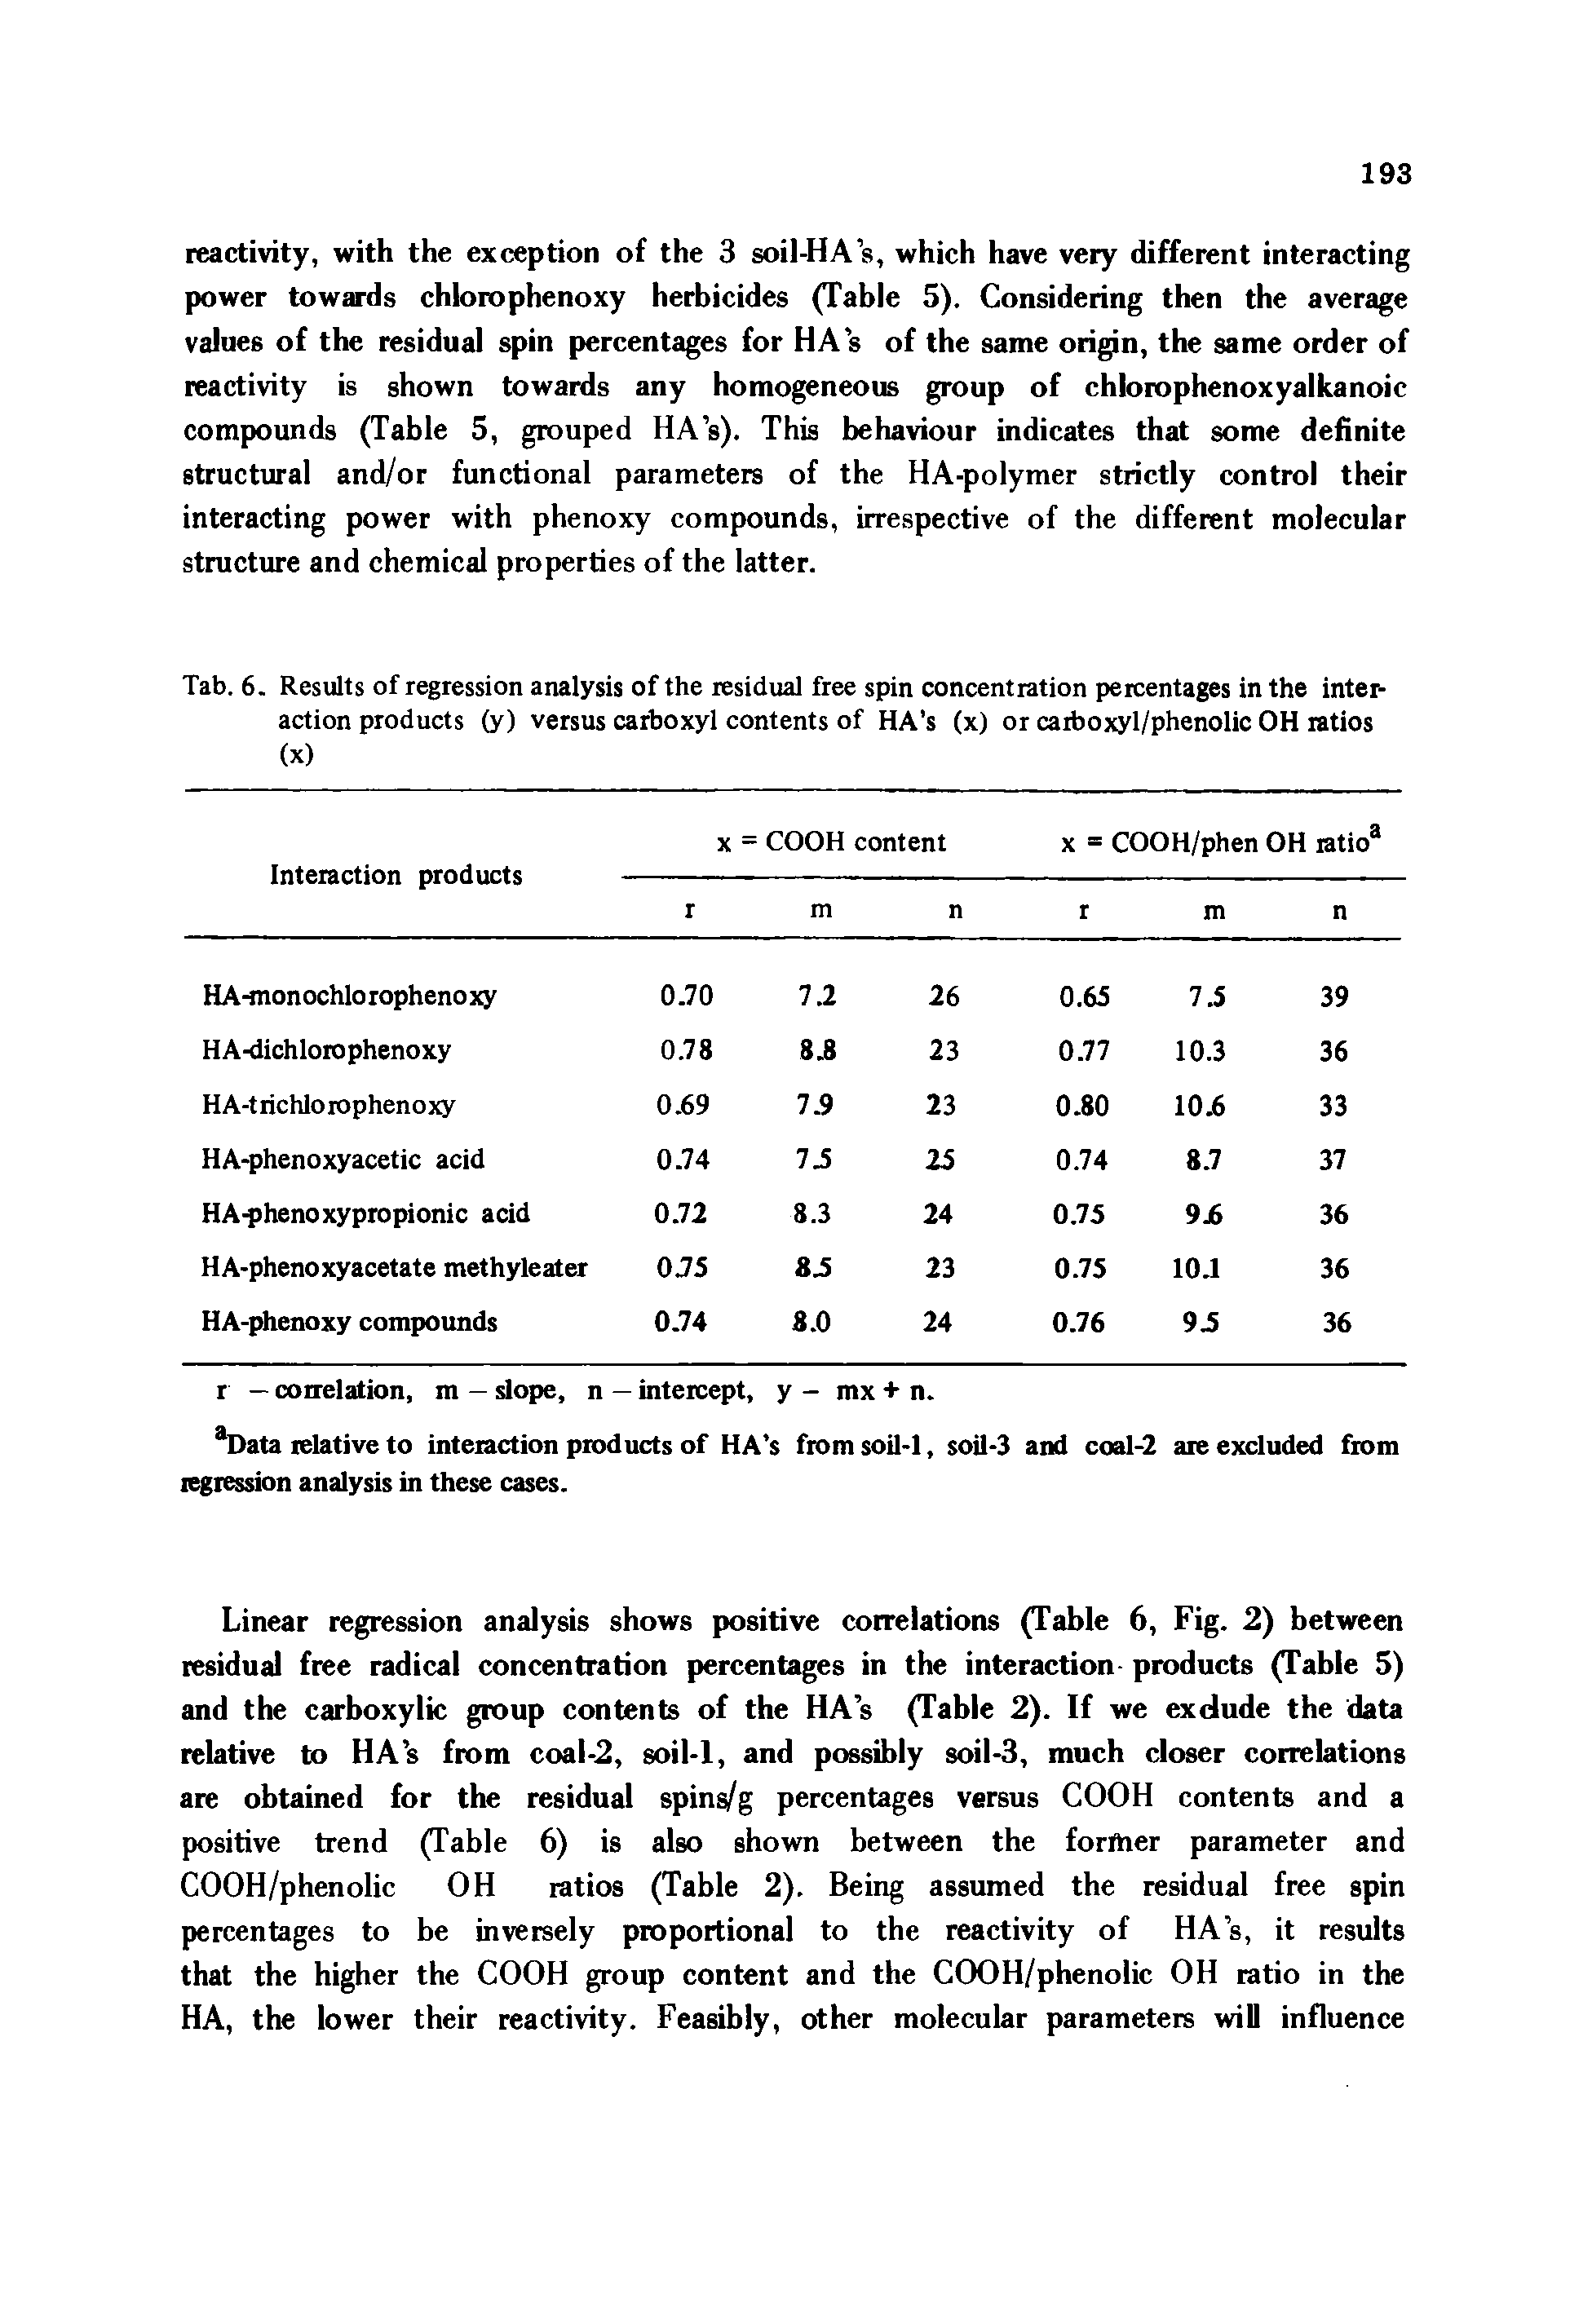 Tab. 6. Results of regression analysis of the residual free spin concentration percentages in the inter action products (y) versus carboxyl contents of HA s (x) or carboxyl/phenolic OH ratios (x)...